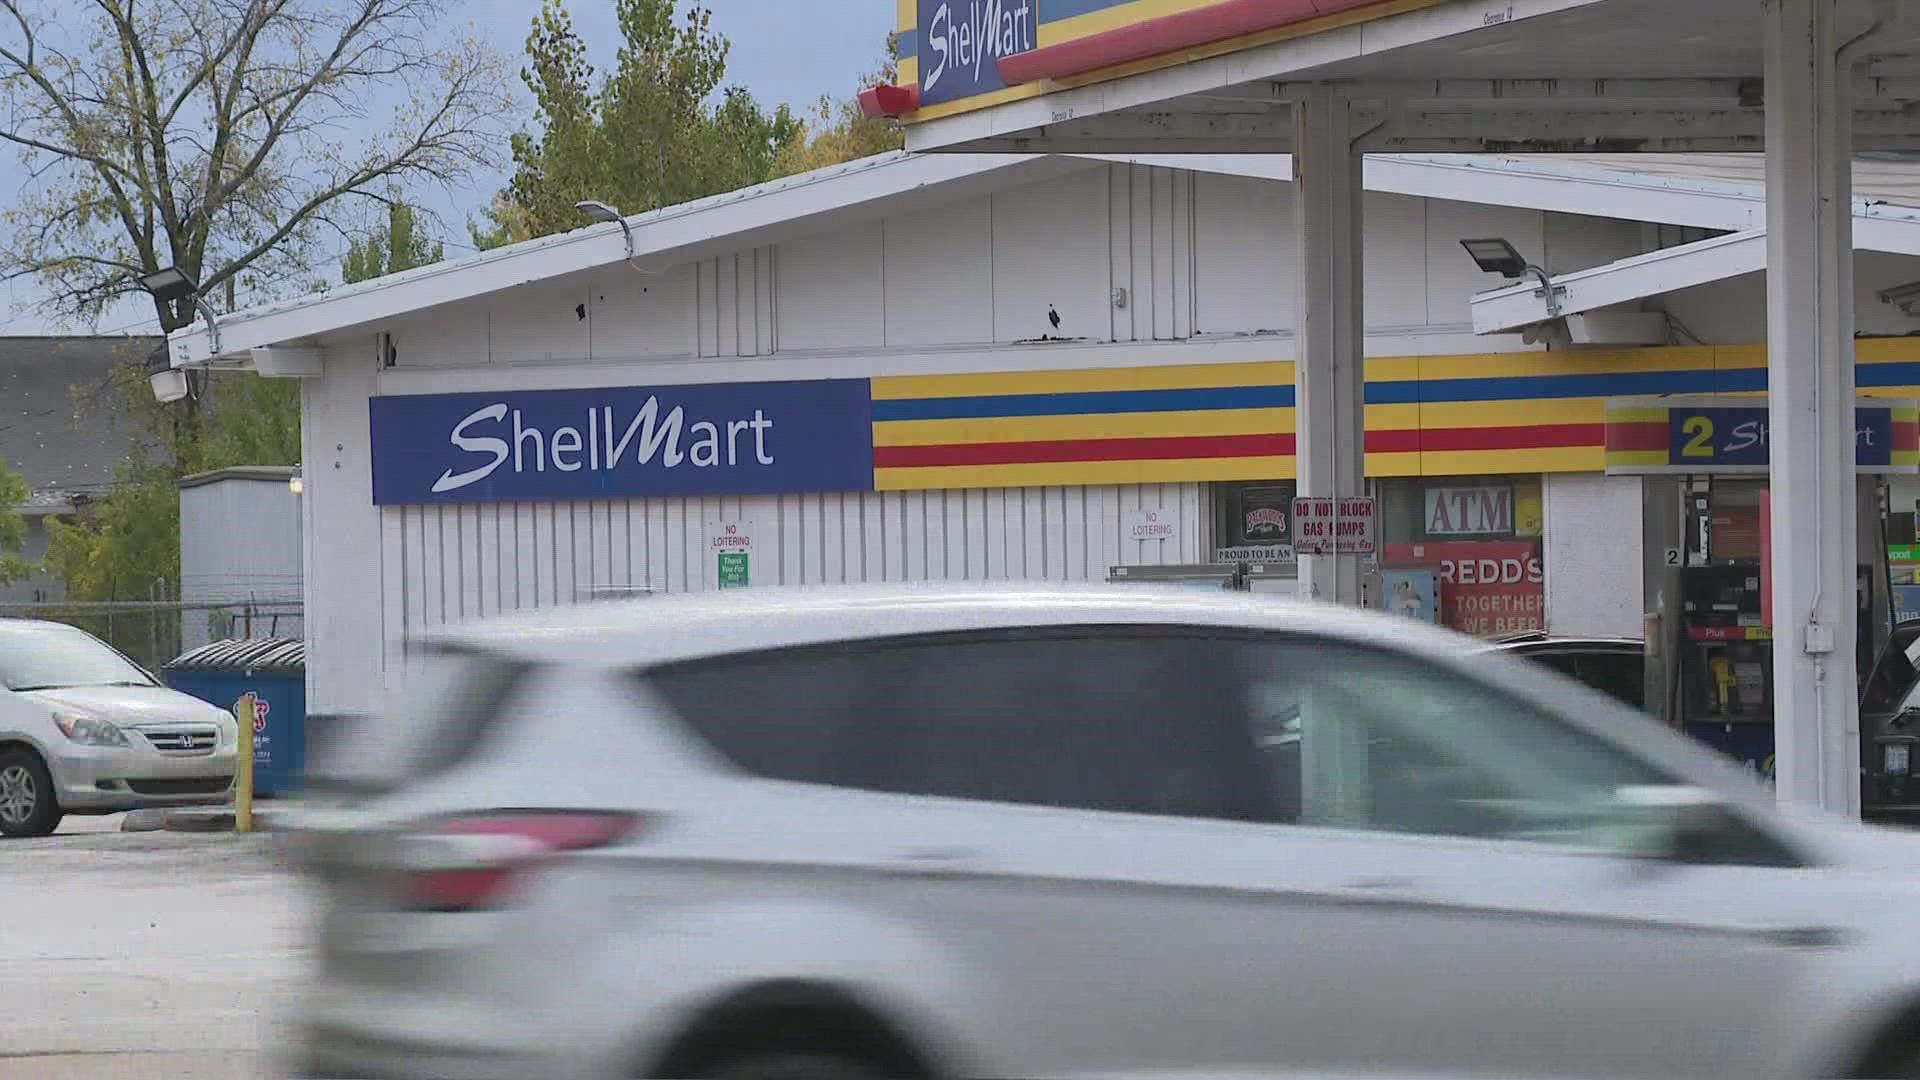 Police were dispatched to the Shell Mart gas station around 2:24 a.m. on Sunday, where they found one man injured from gunfire. He later died.